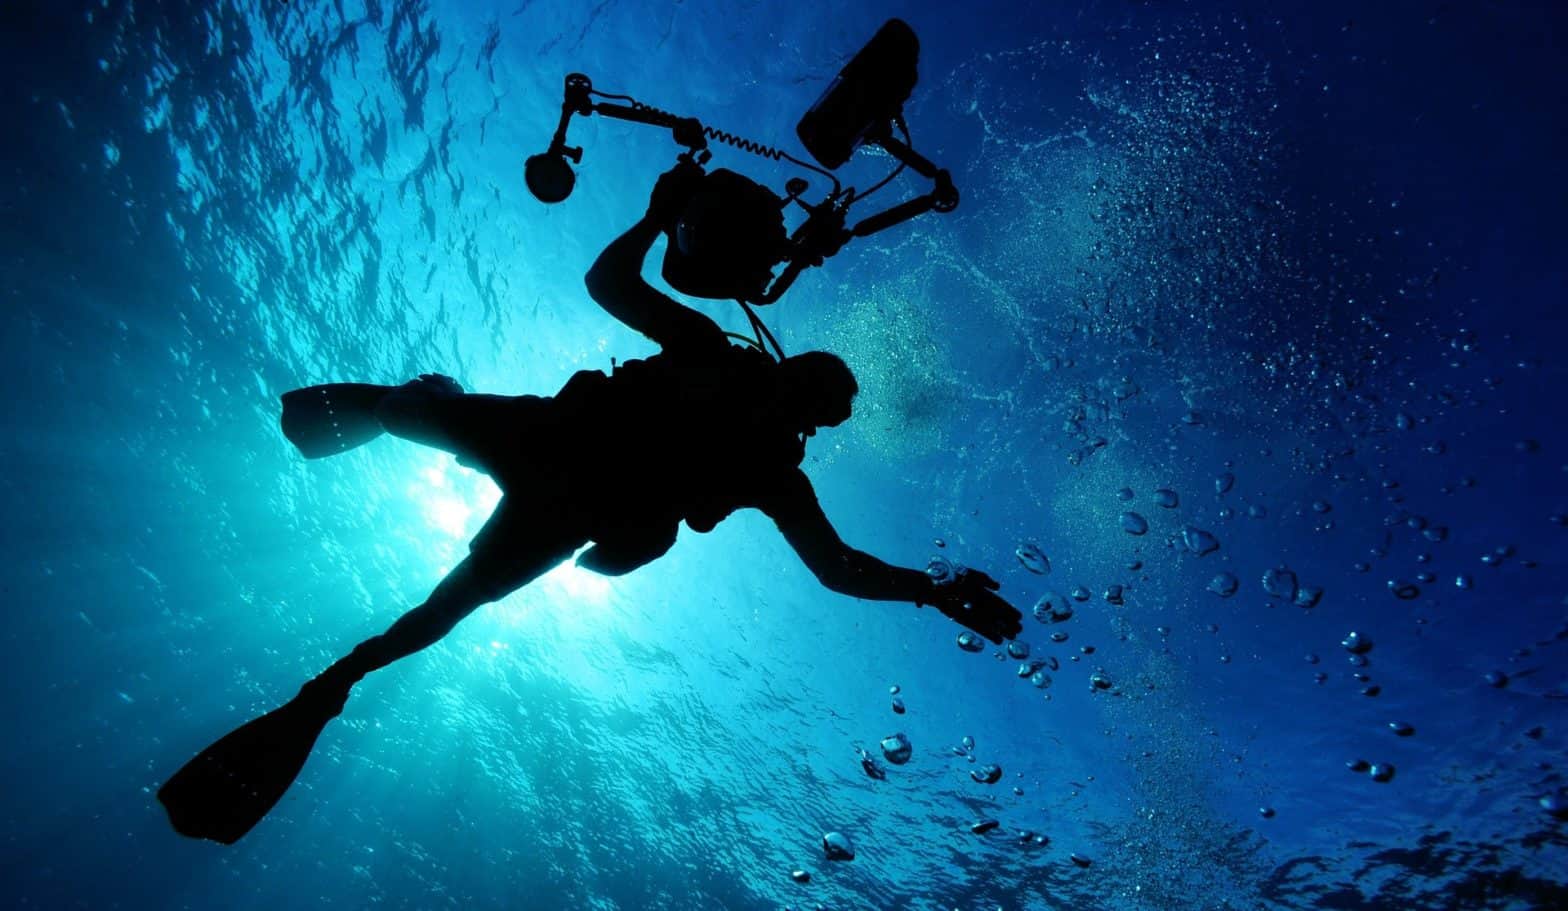 photo is a diver in the sea with what looks like camera equipment. Hopefully they know the dangers of nitrogen narcosis.